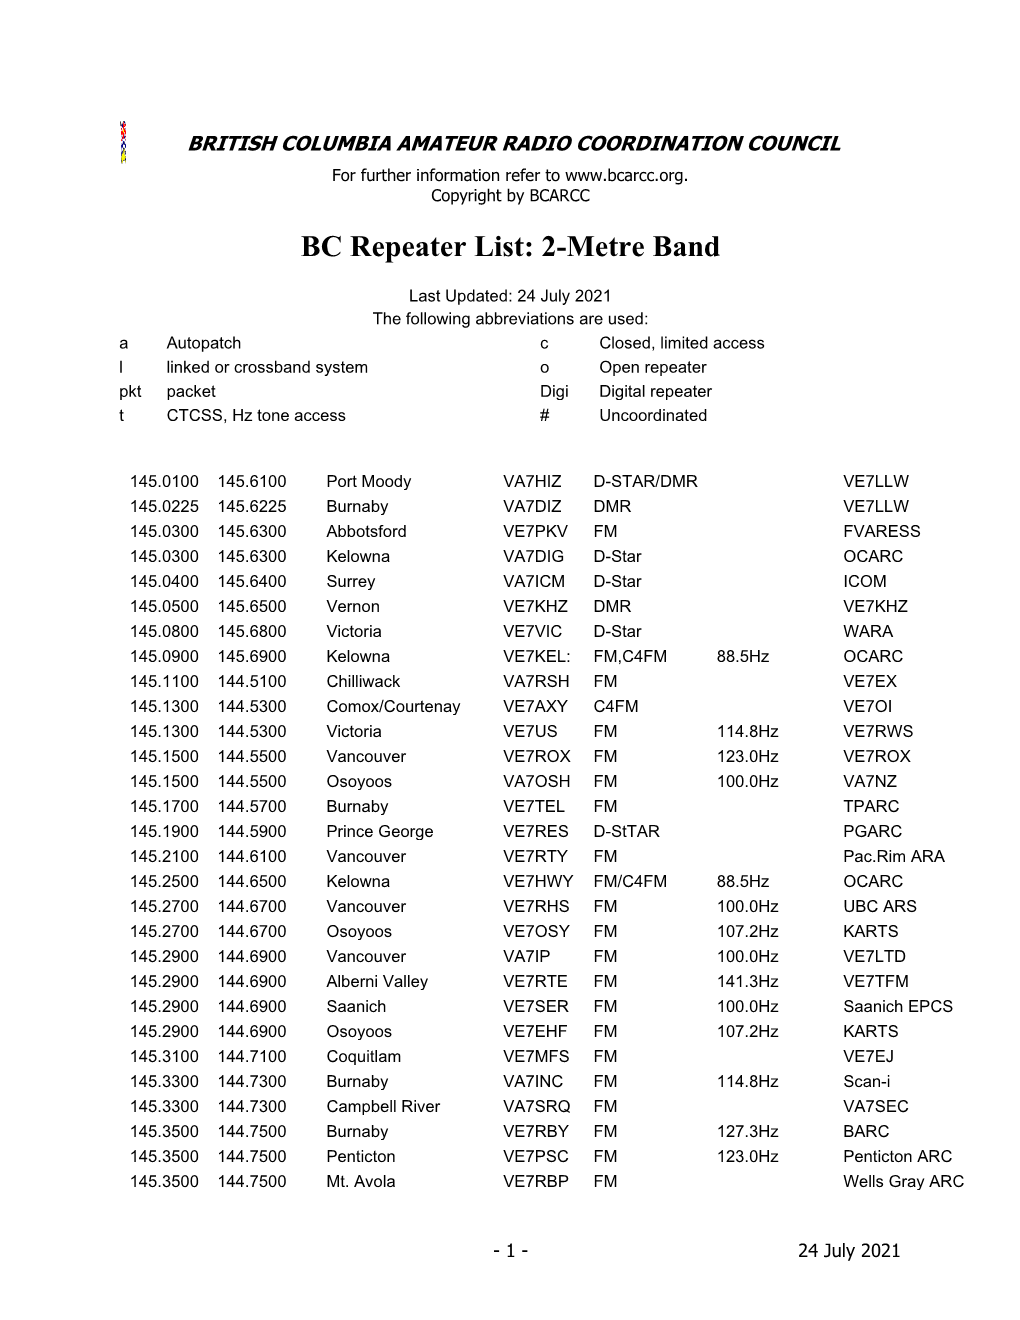 BC Repeater List: 2-Metre Band